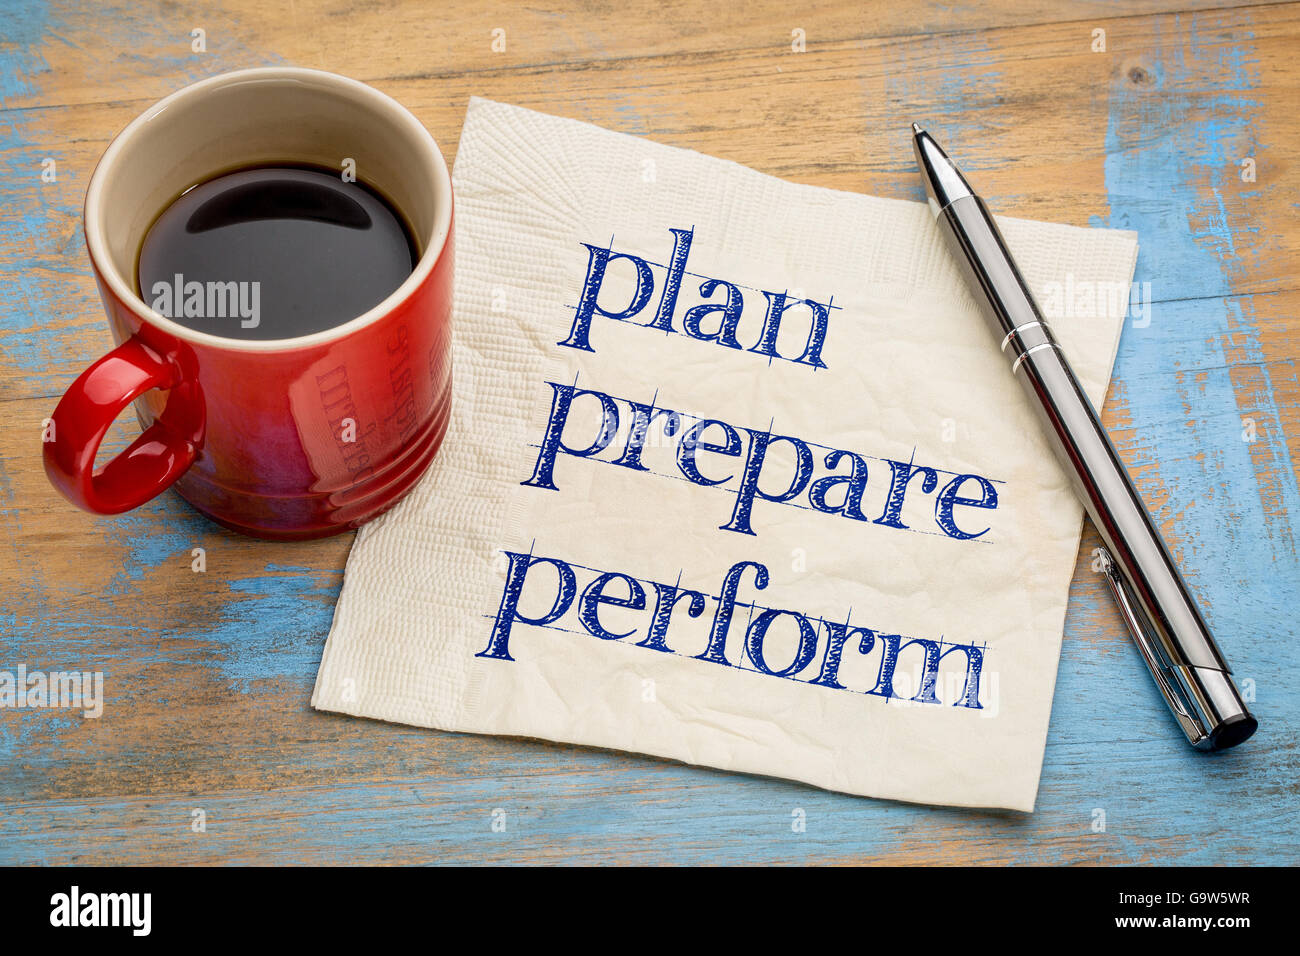 plan, prepare, perform - handwriting on a napkin with a cup of espresso coffee Stock Photo